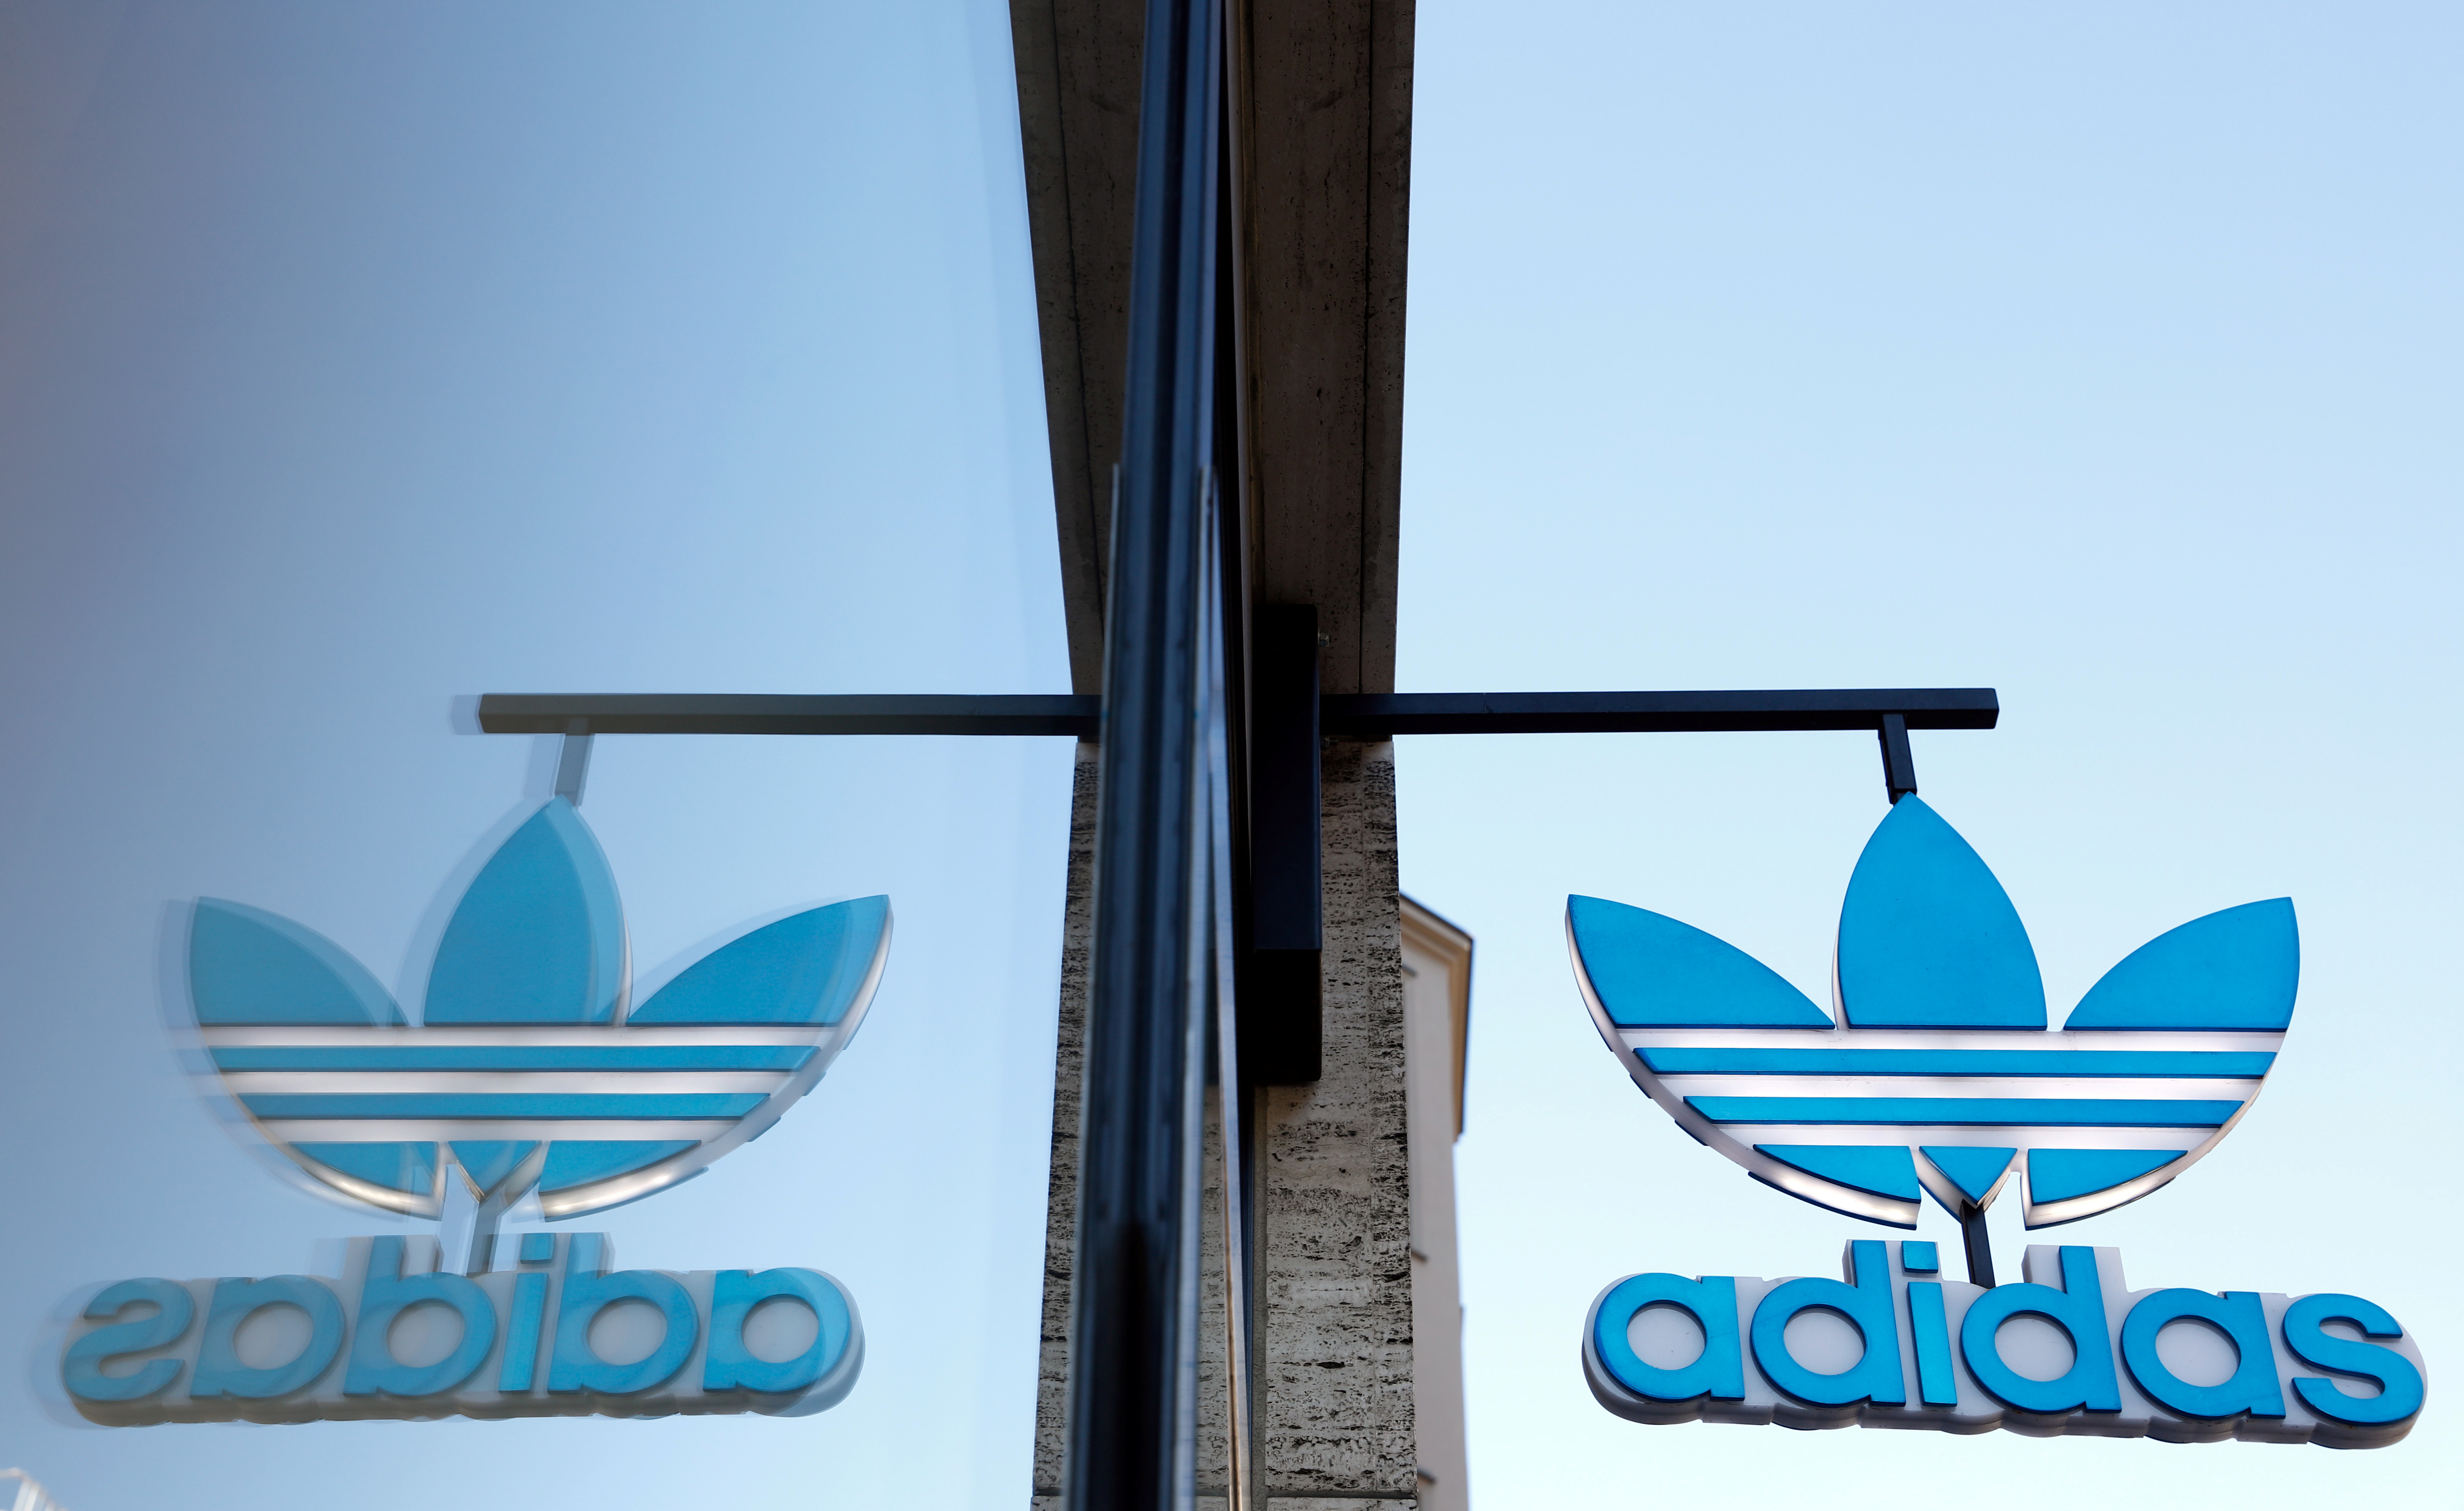 Adidas pushes online sales and sustainability in five-year plan